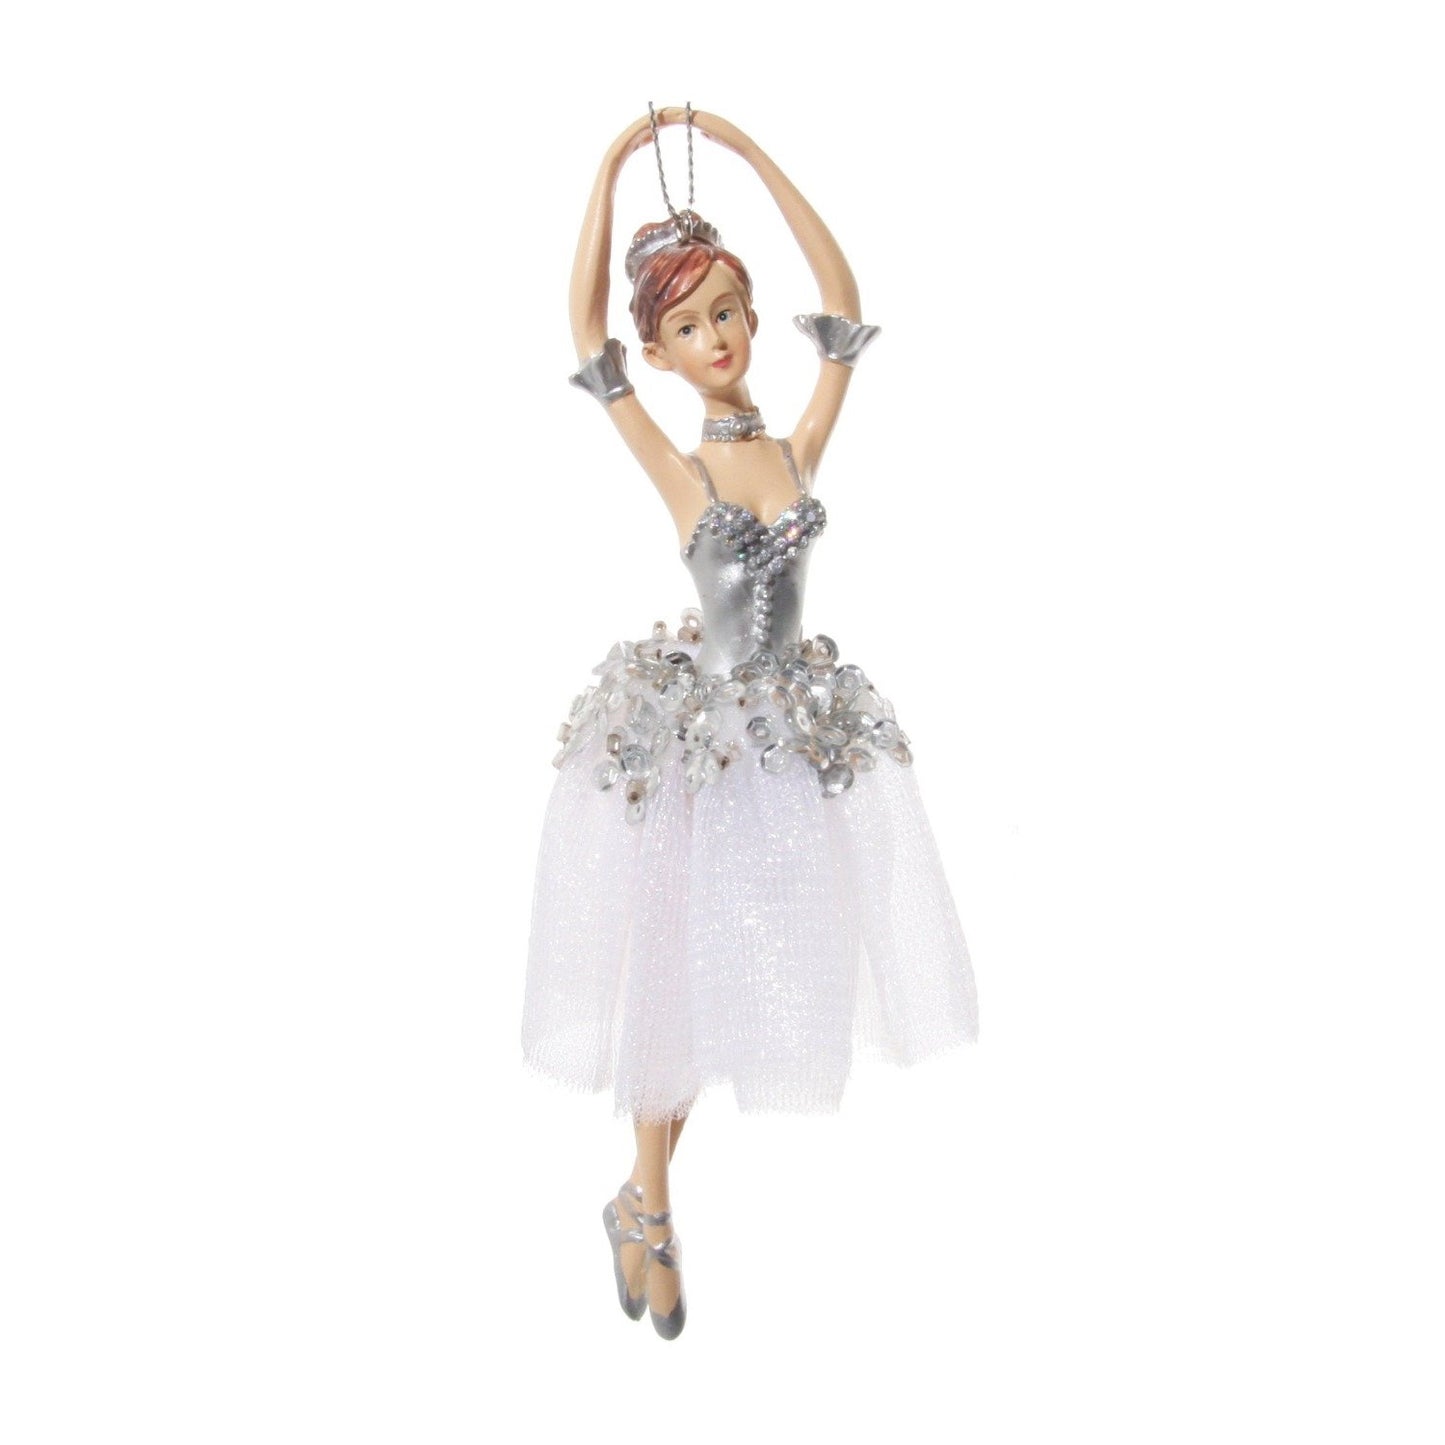 Shishi Christmas Ballerina with Silver Sequin Tutu Hanging Ornament - Arms Up